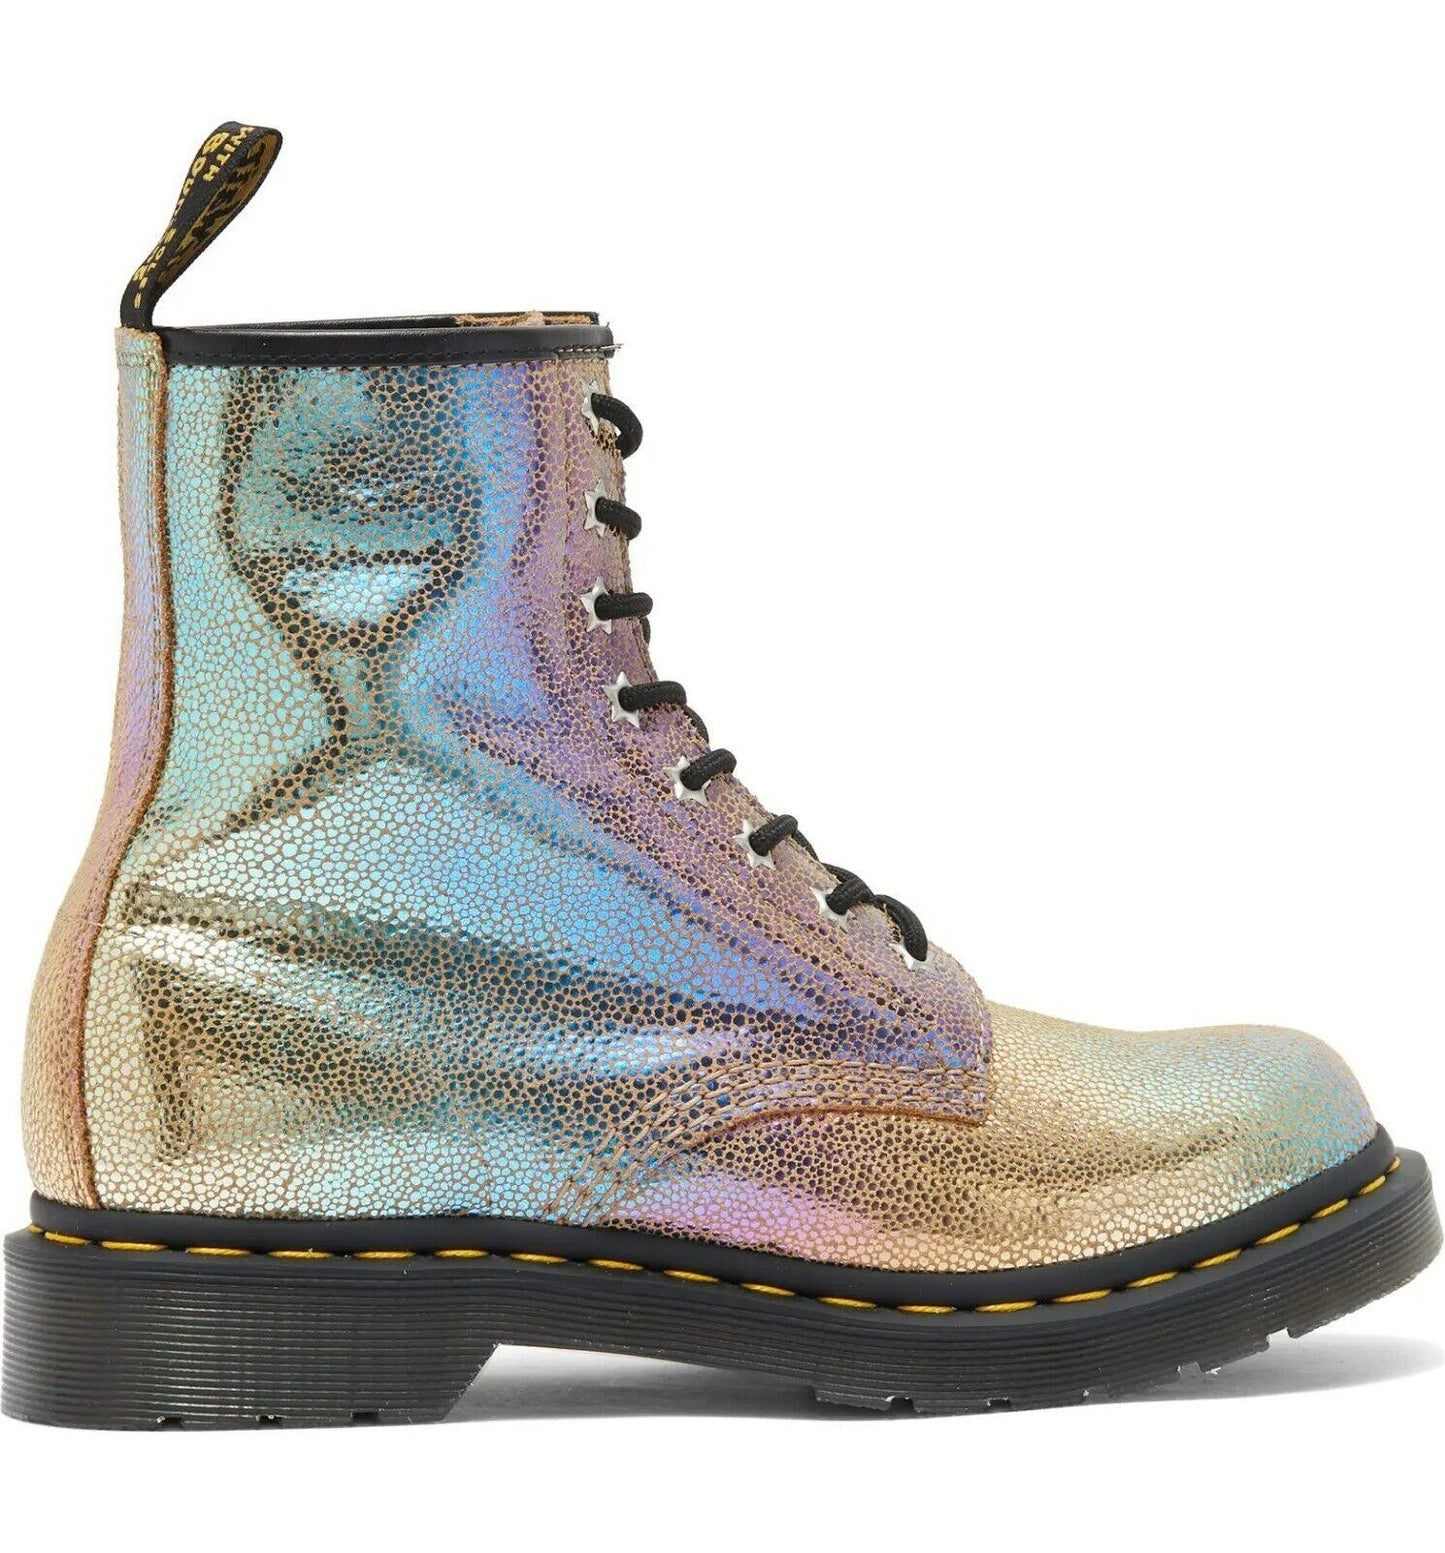 Dr. Martens 1460 Rainbow Ray Leather Lace Up Combat Boots Size US 7  EUR 38 - SVNYFancy